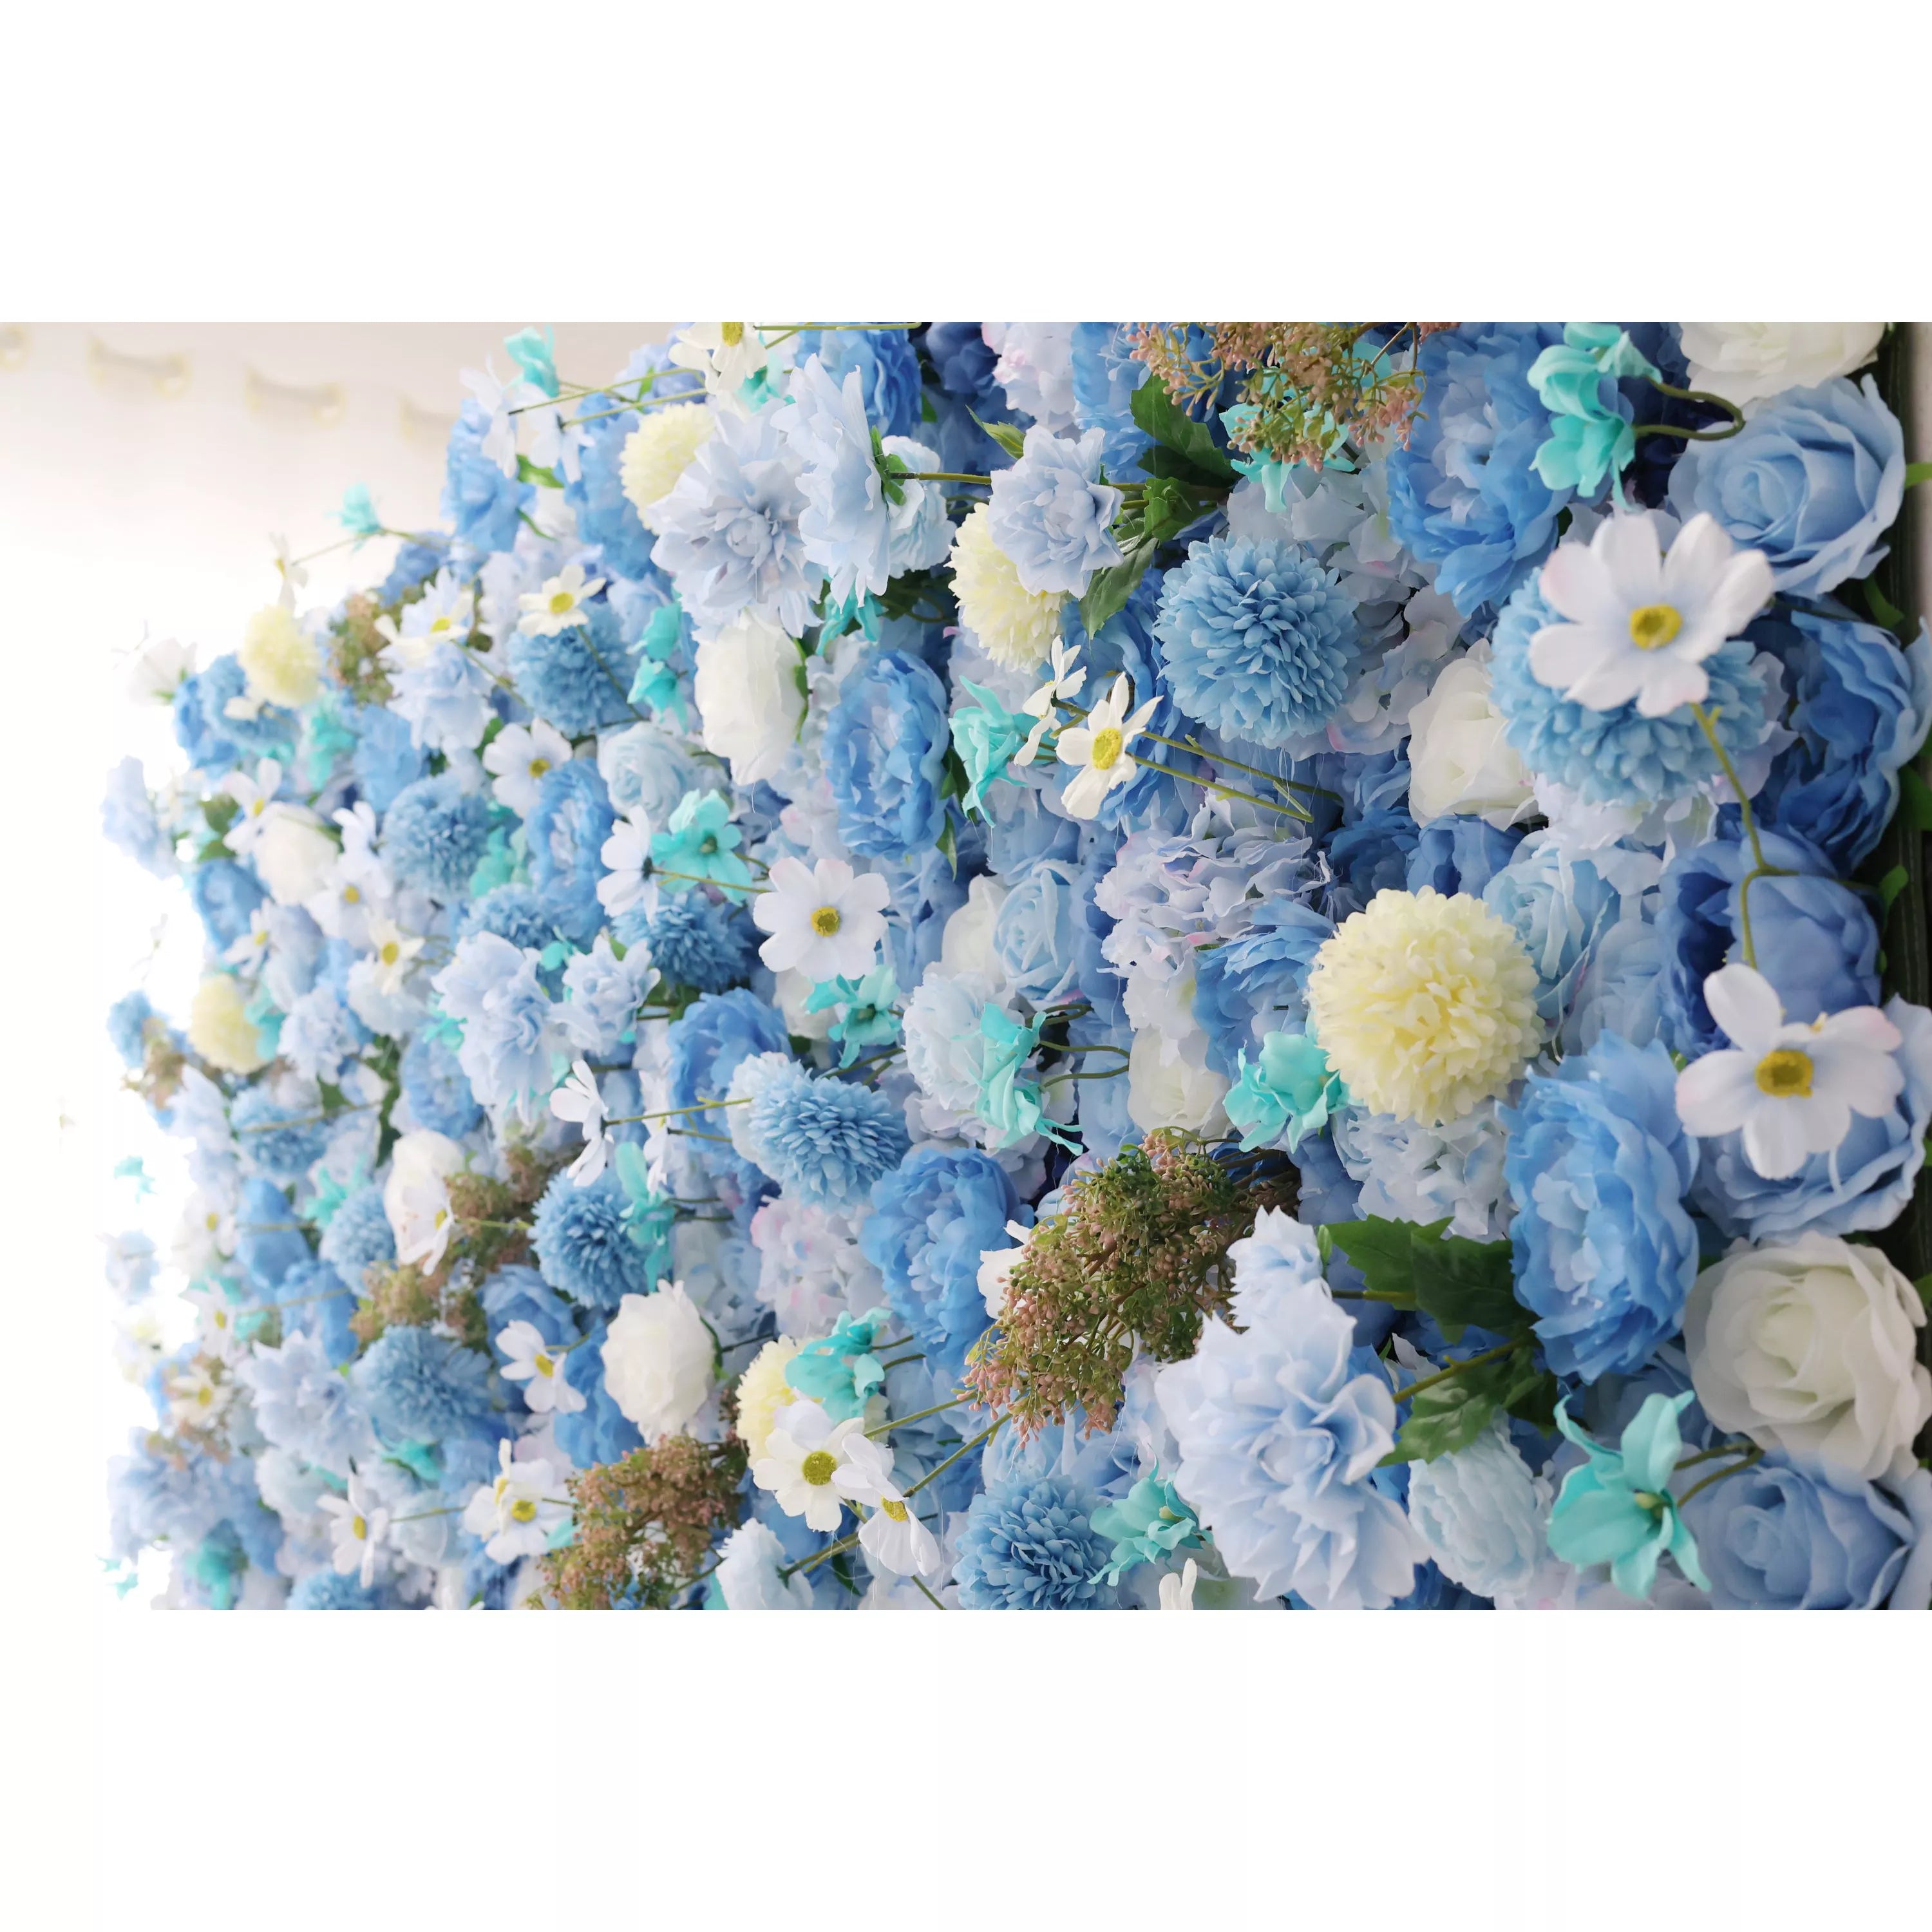 Valar Flowers Introduces: Azure Harmony – A Serene Symphony of Blue & Pale Yellow Fabric Blooms – Ideal Floral Wall for Nautical Themes, Events & Tranquil Interior Ambiances-VF-219-2